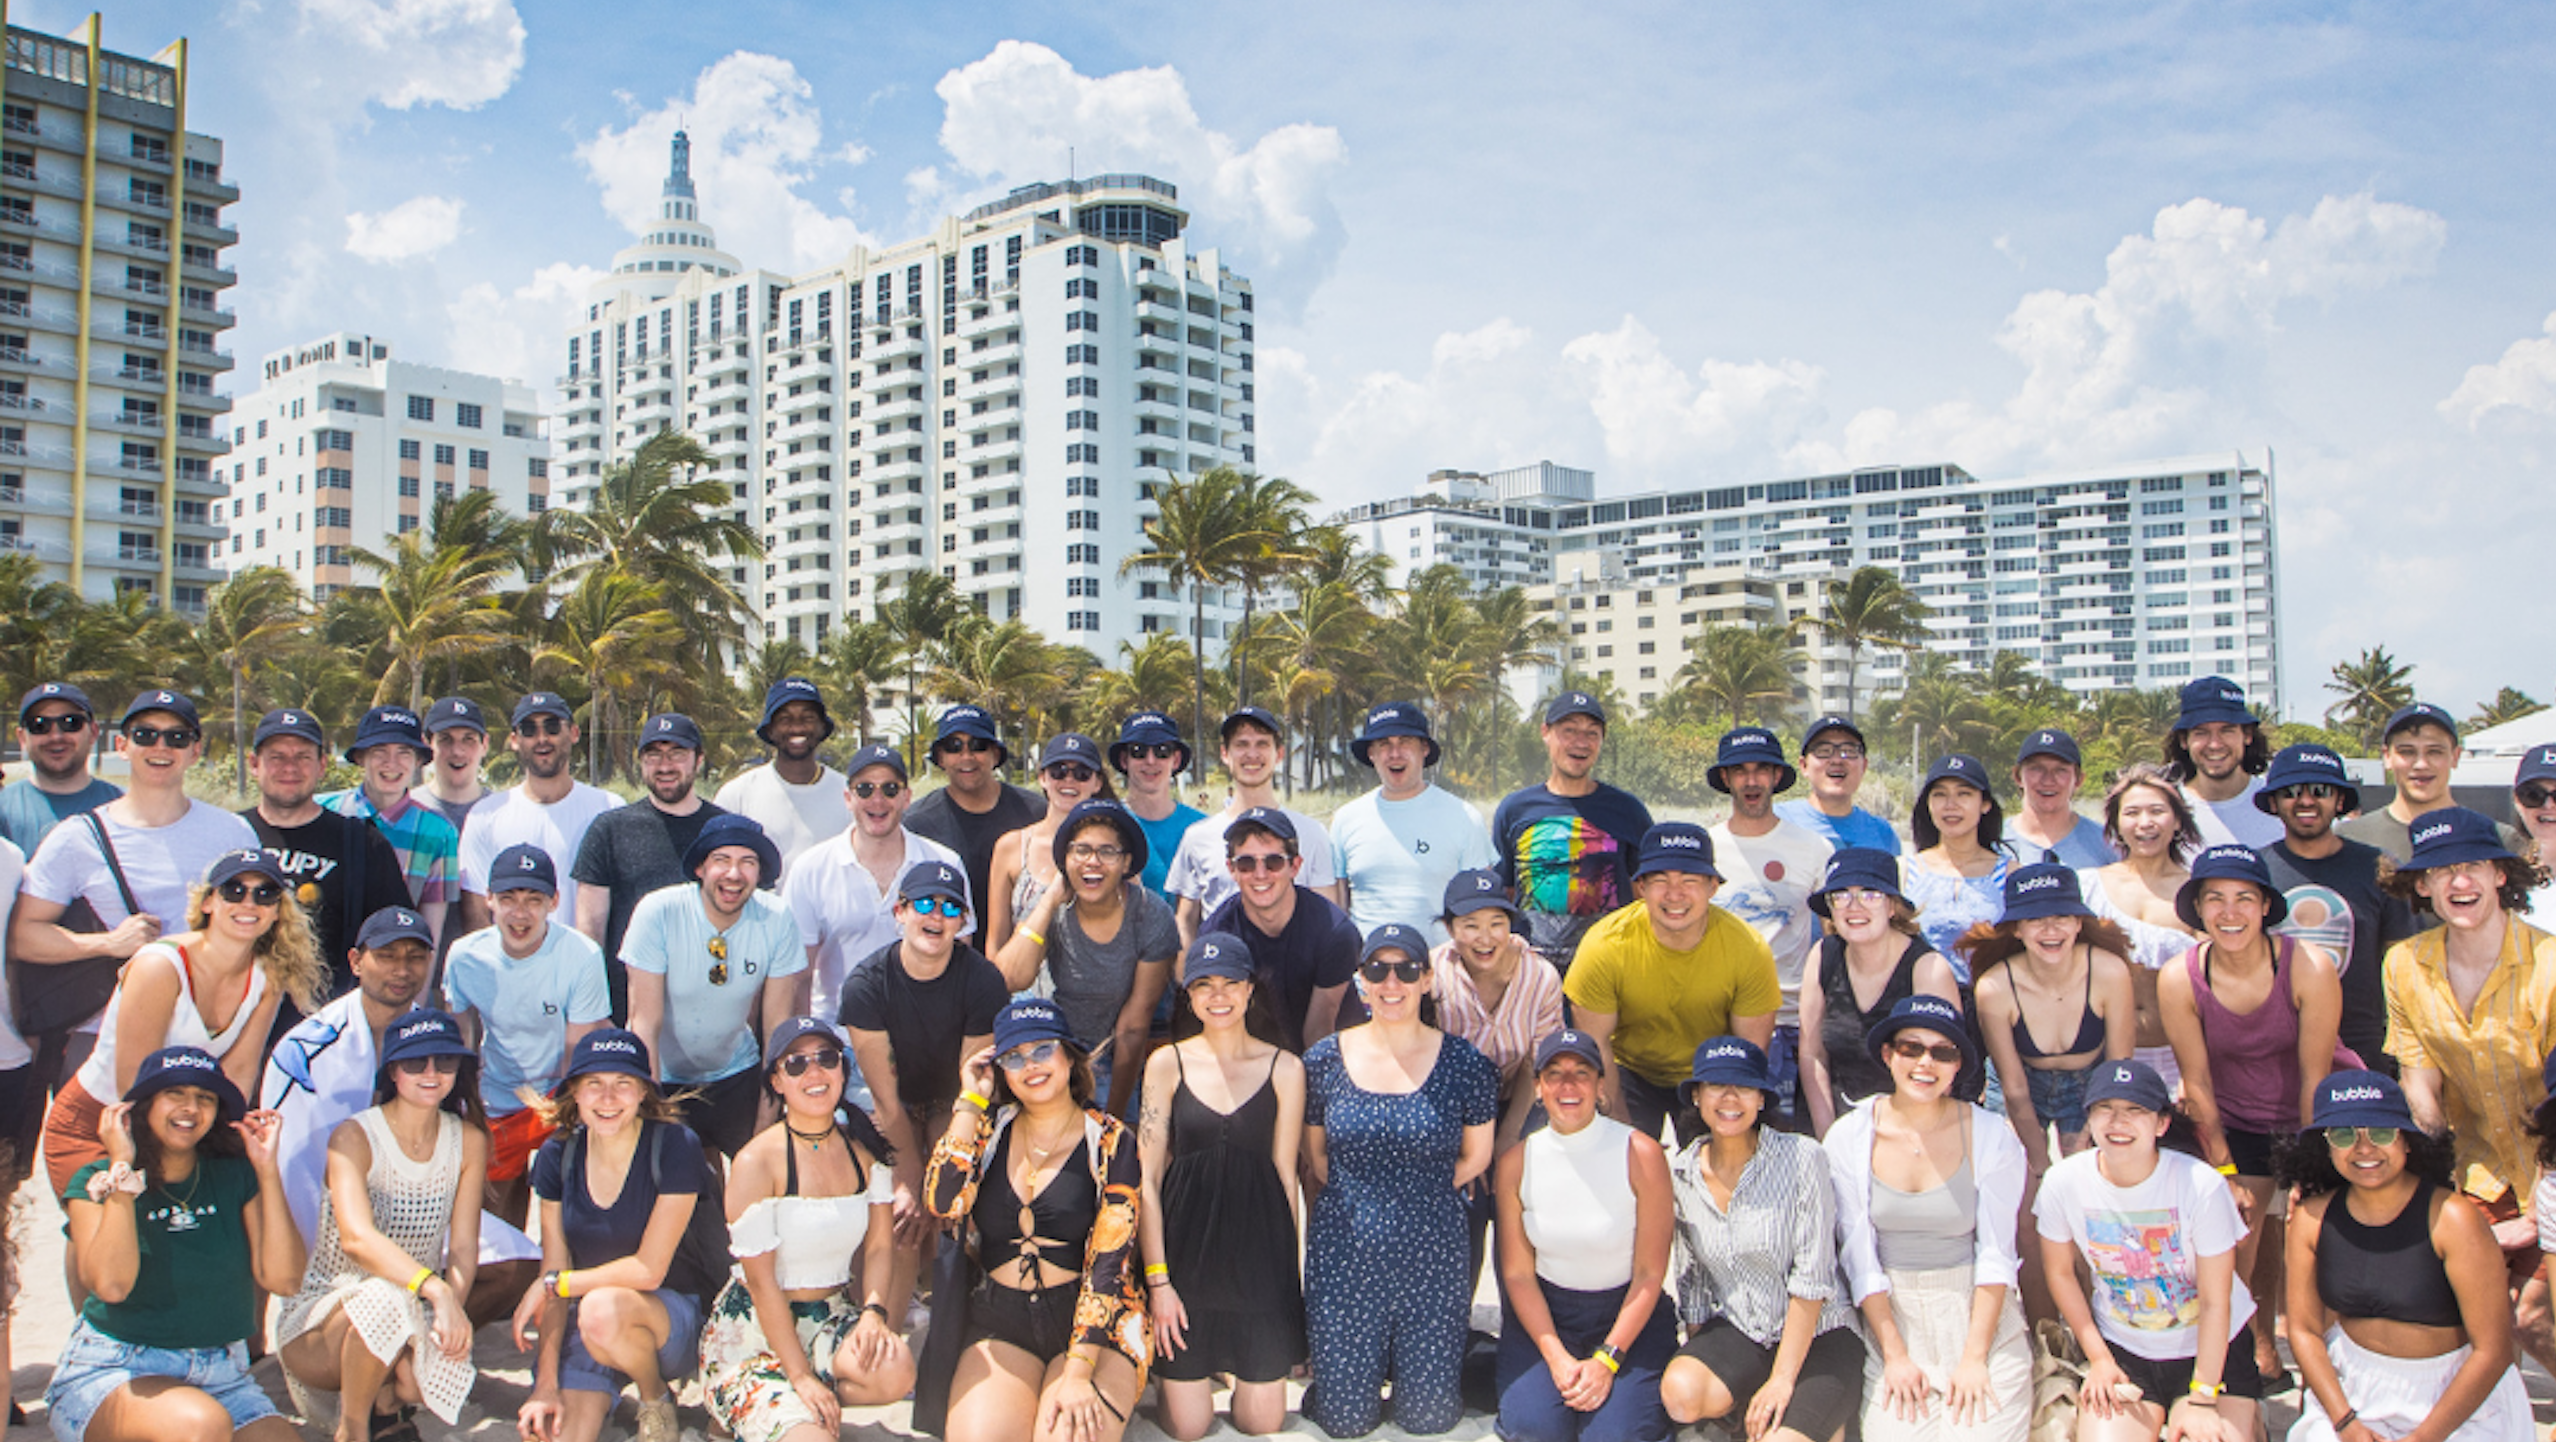 The Bubble team gathers on a beach in Miami.